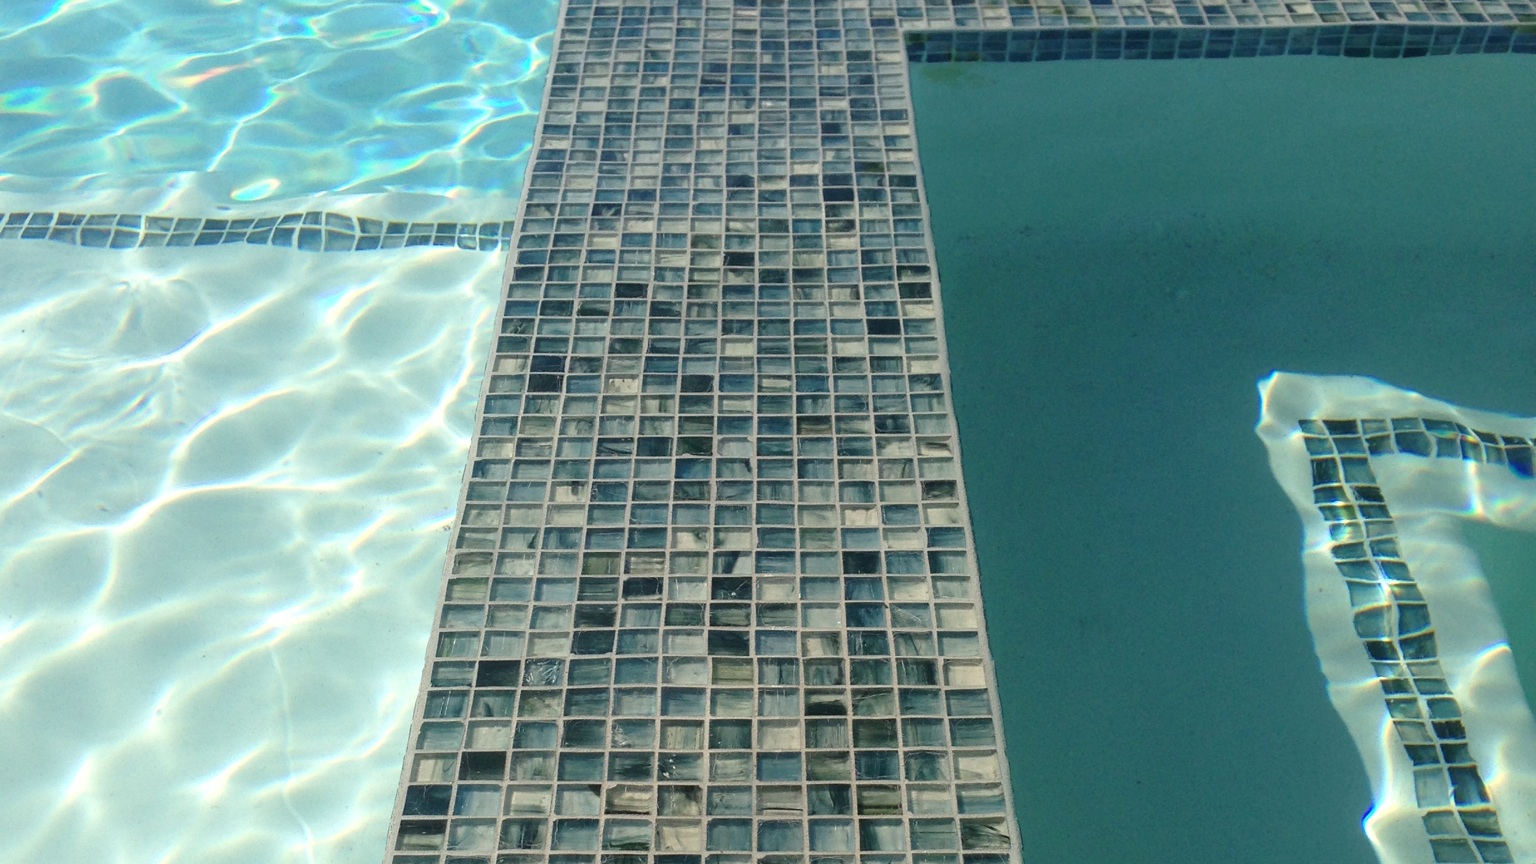 Glass Tile Vs. Ceramic Tile: Which Is Best For Your Pool?